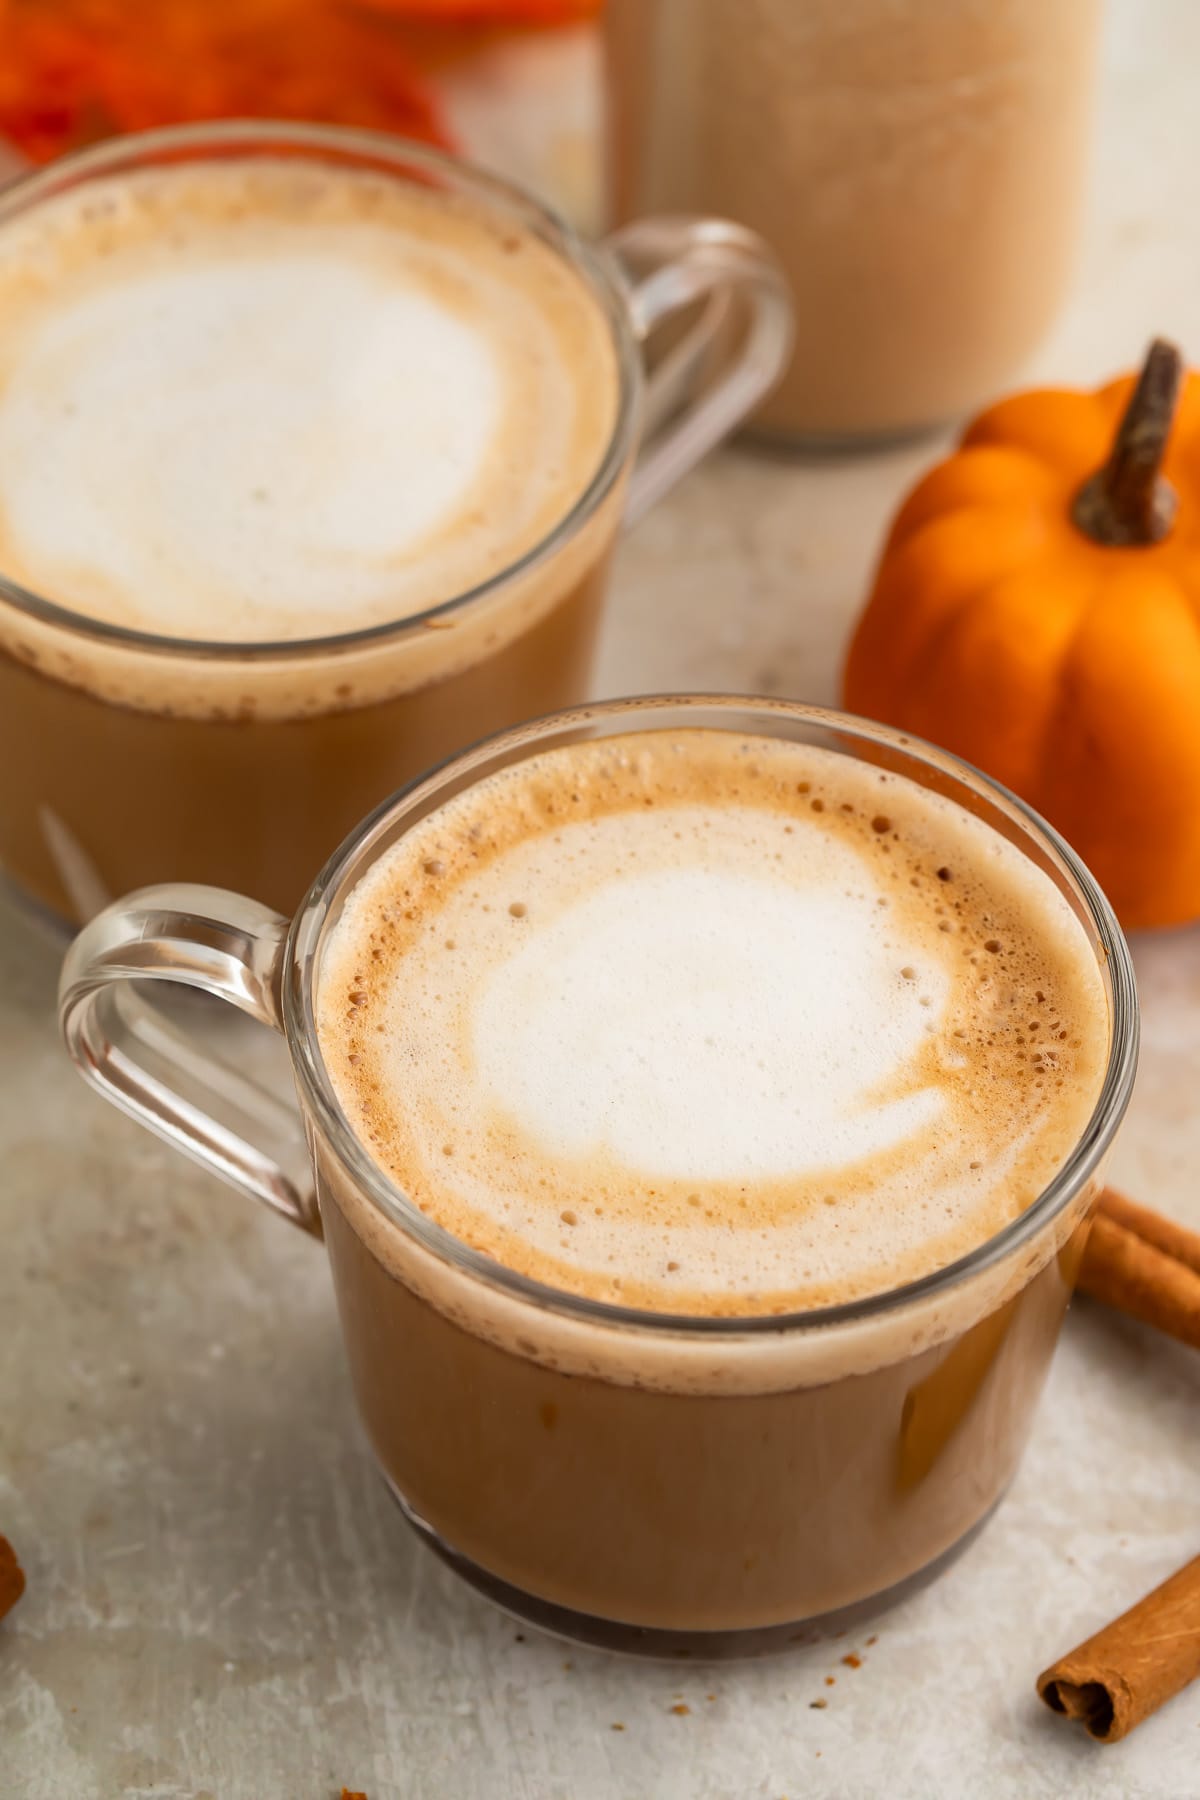 Two clear glass coffee mugs holding a pumpkin spice latte with rich pumpkin spice creamer.